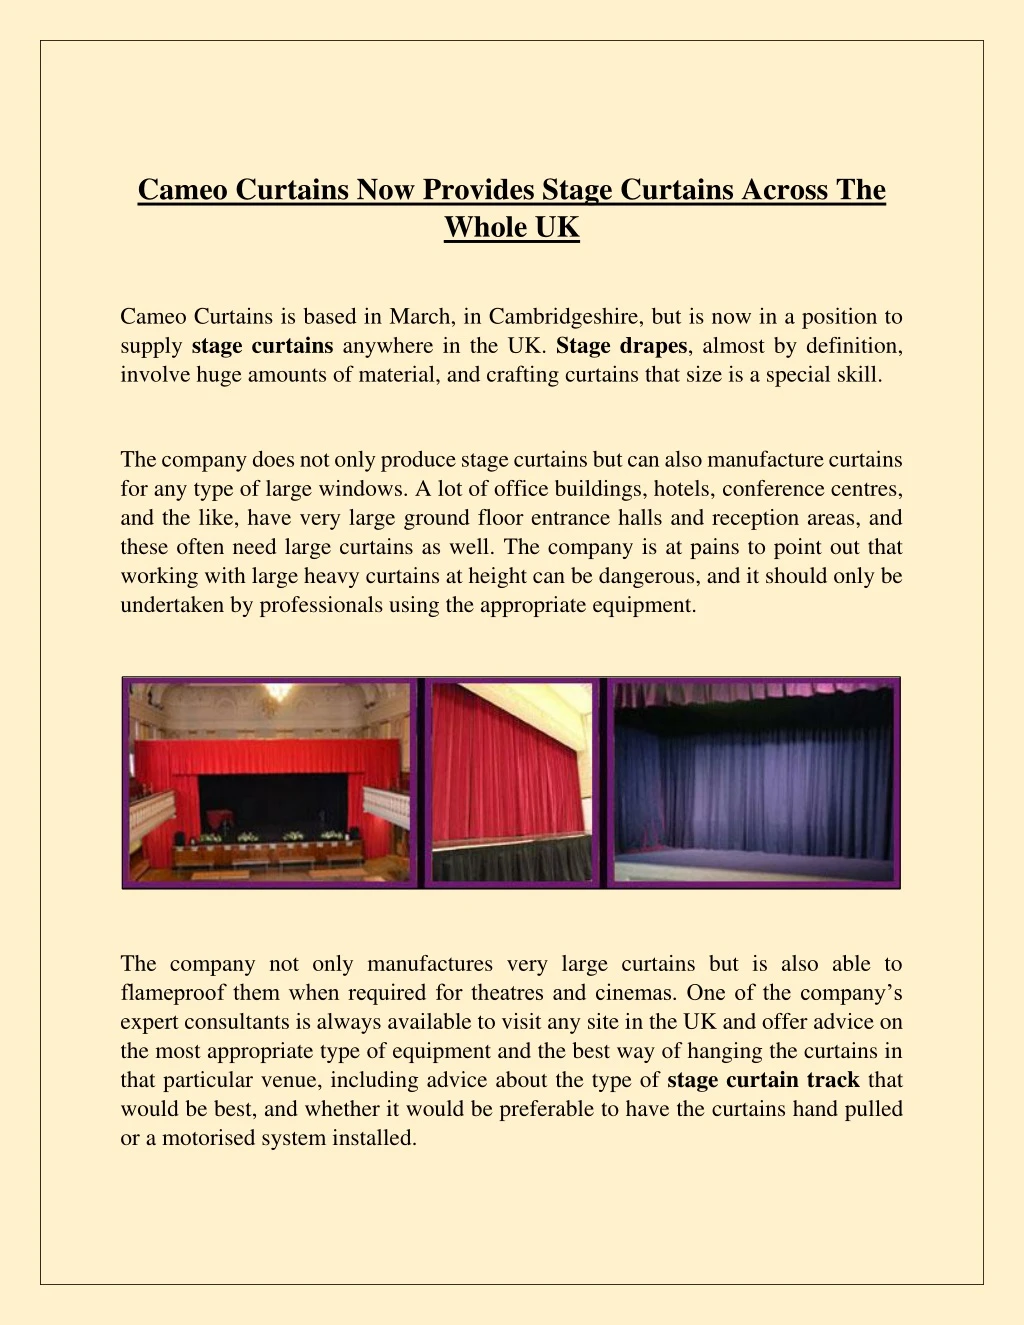 cameo curtains now provides stage curtains across